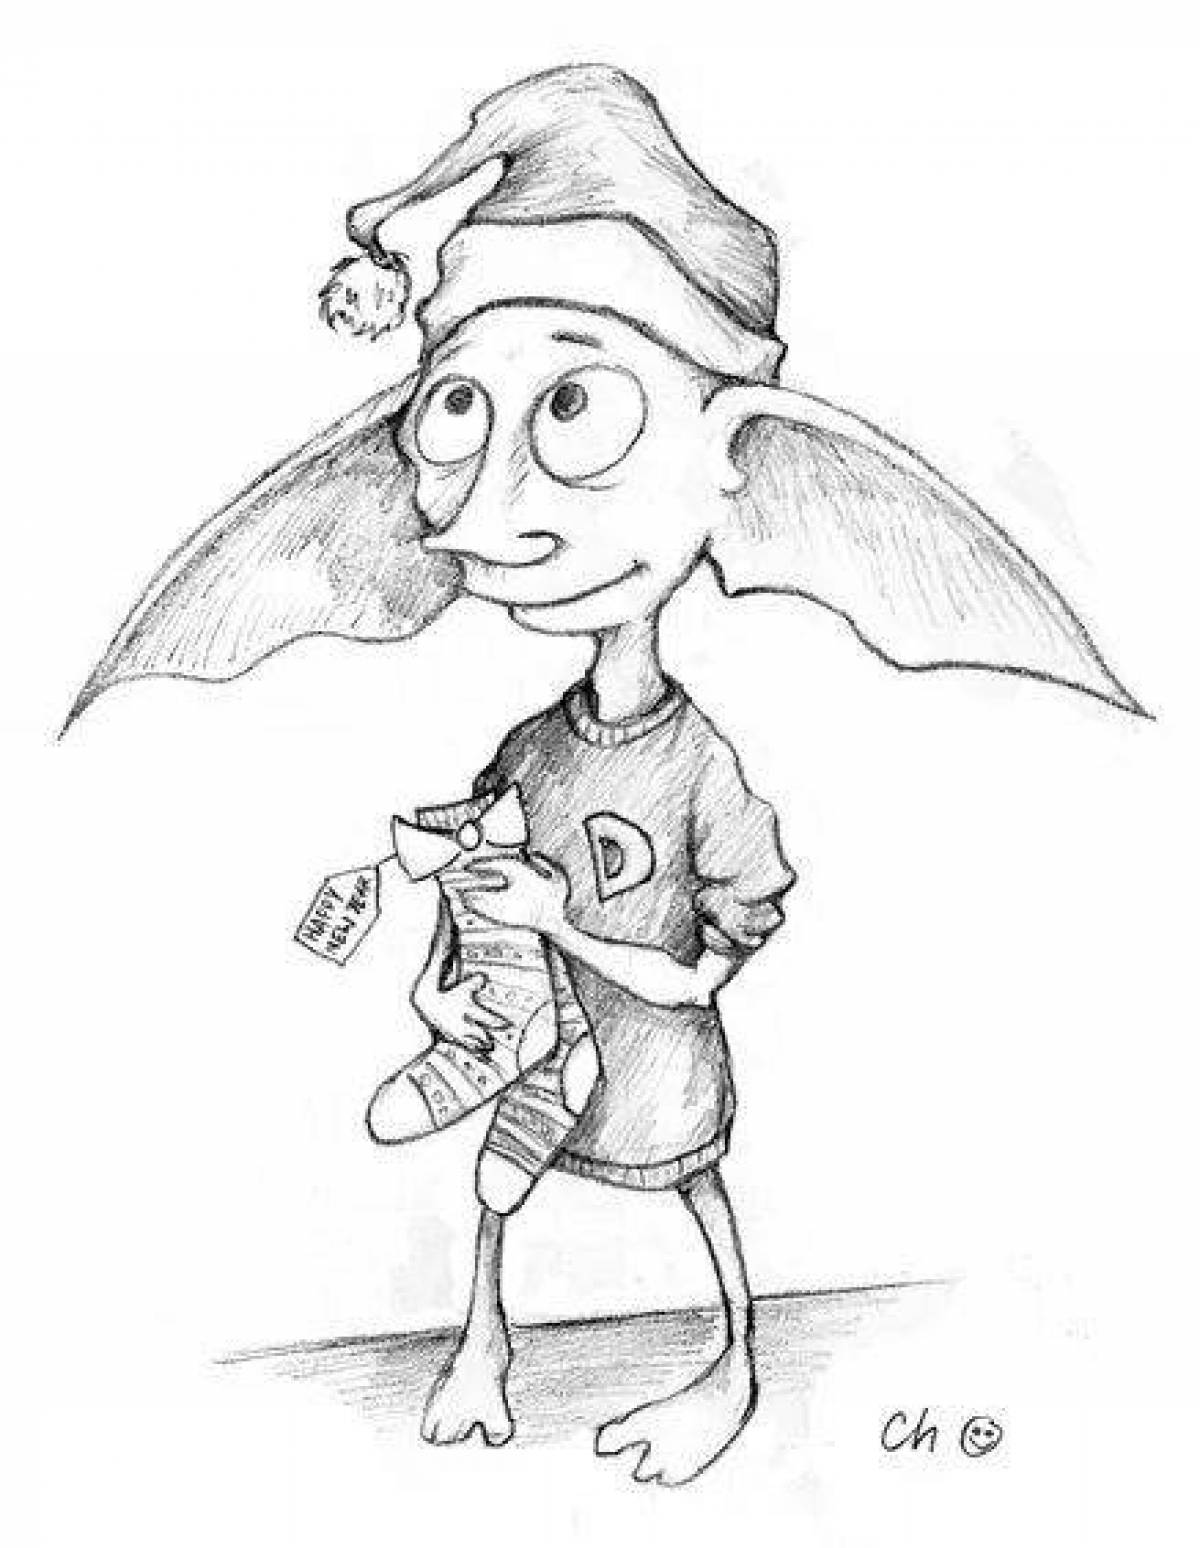 Crazy dobby coloring page